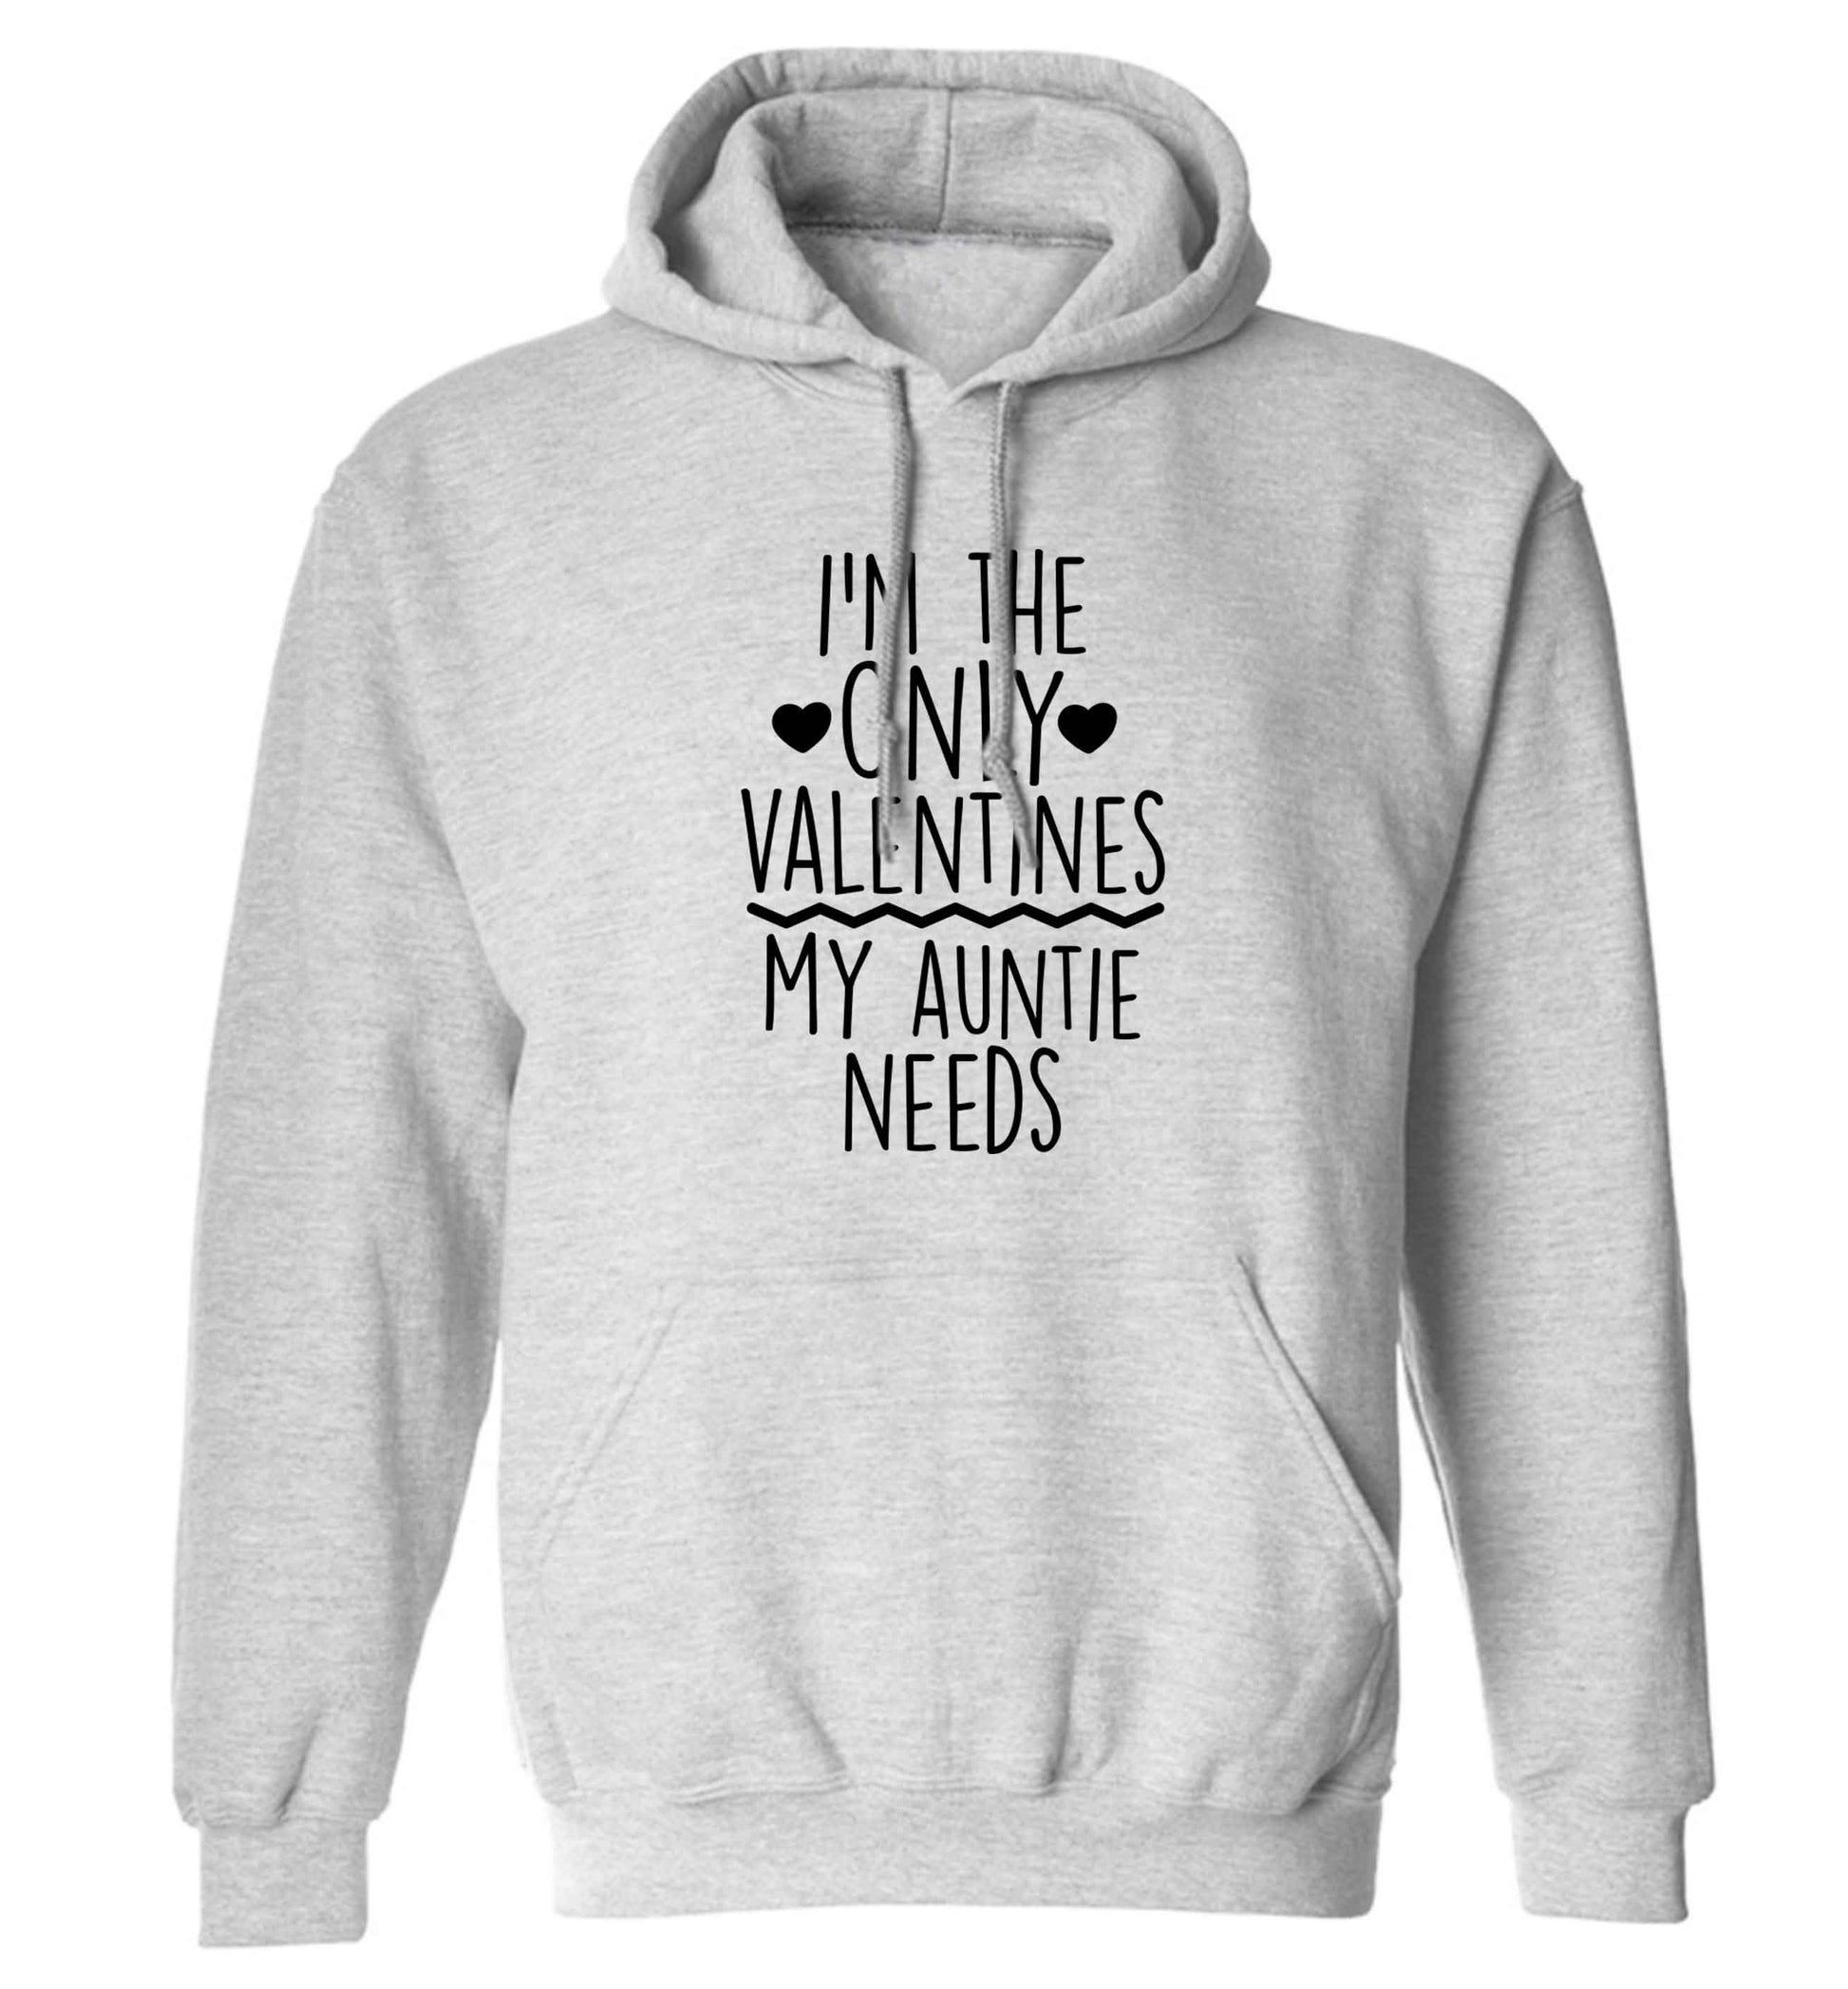 I'm the only valentines my auntie needs adults unisex grey hoodie 2XL